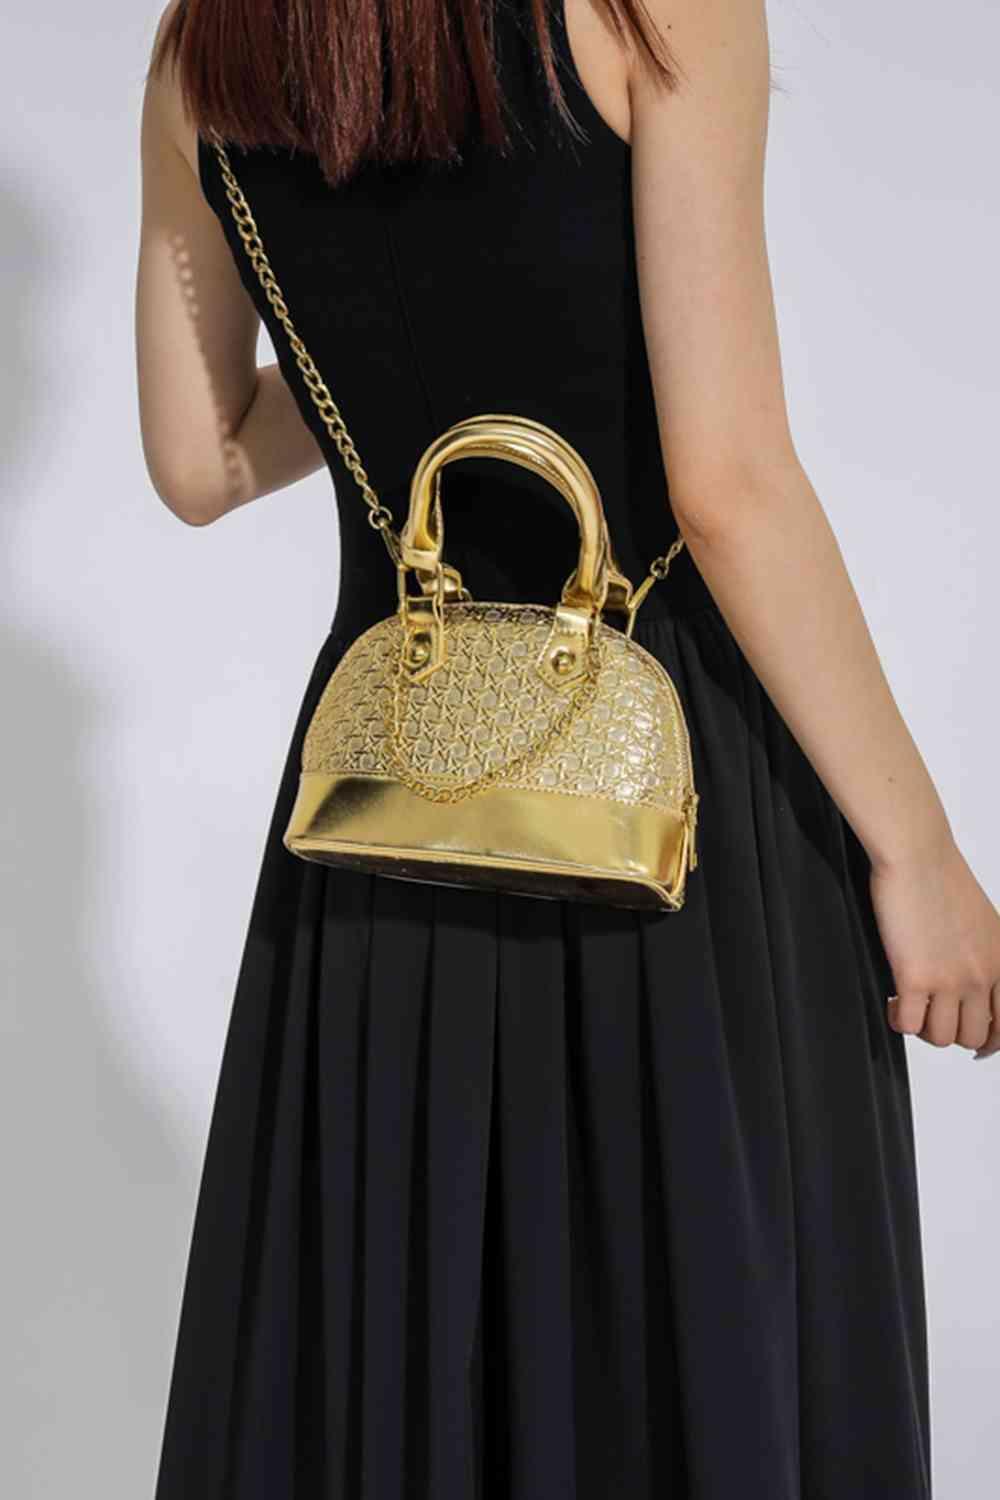 a woman in a black dress holding a gold purse